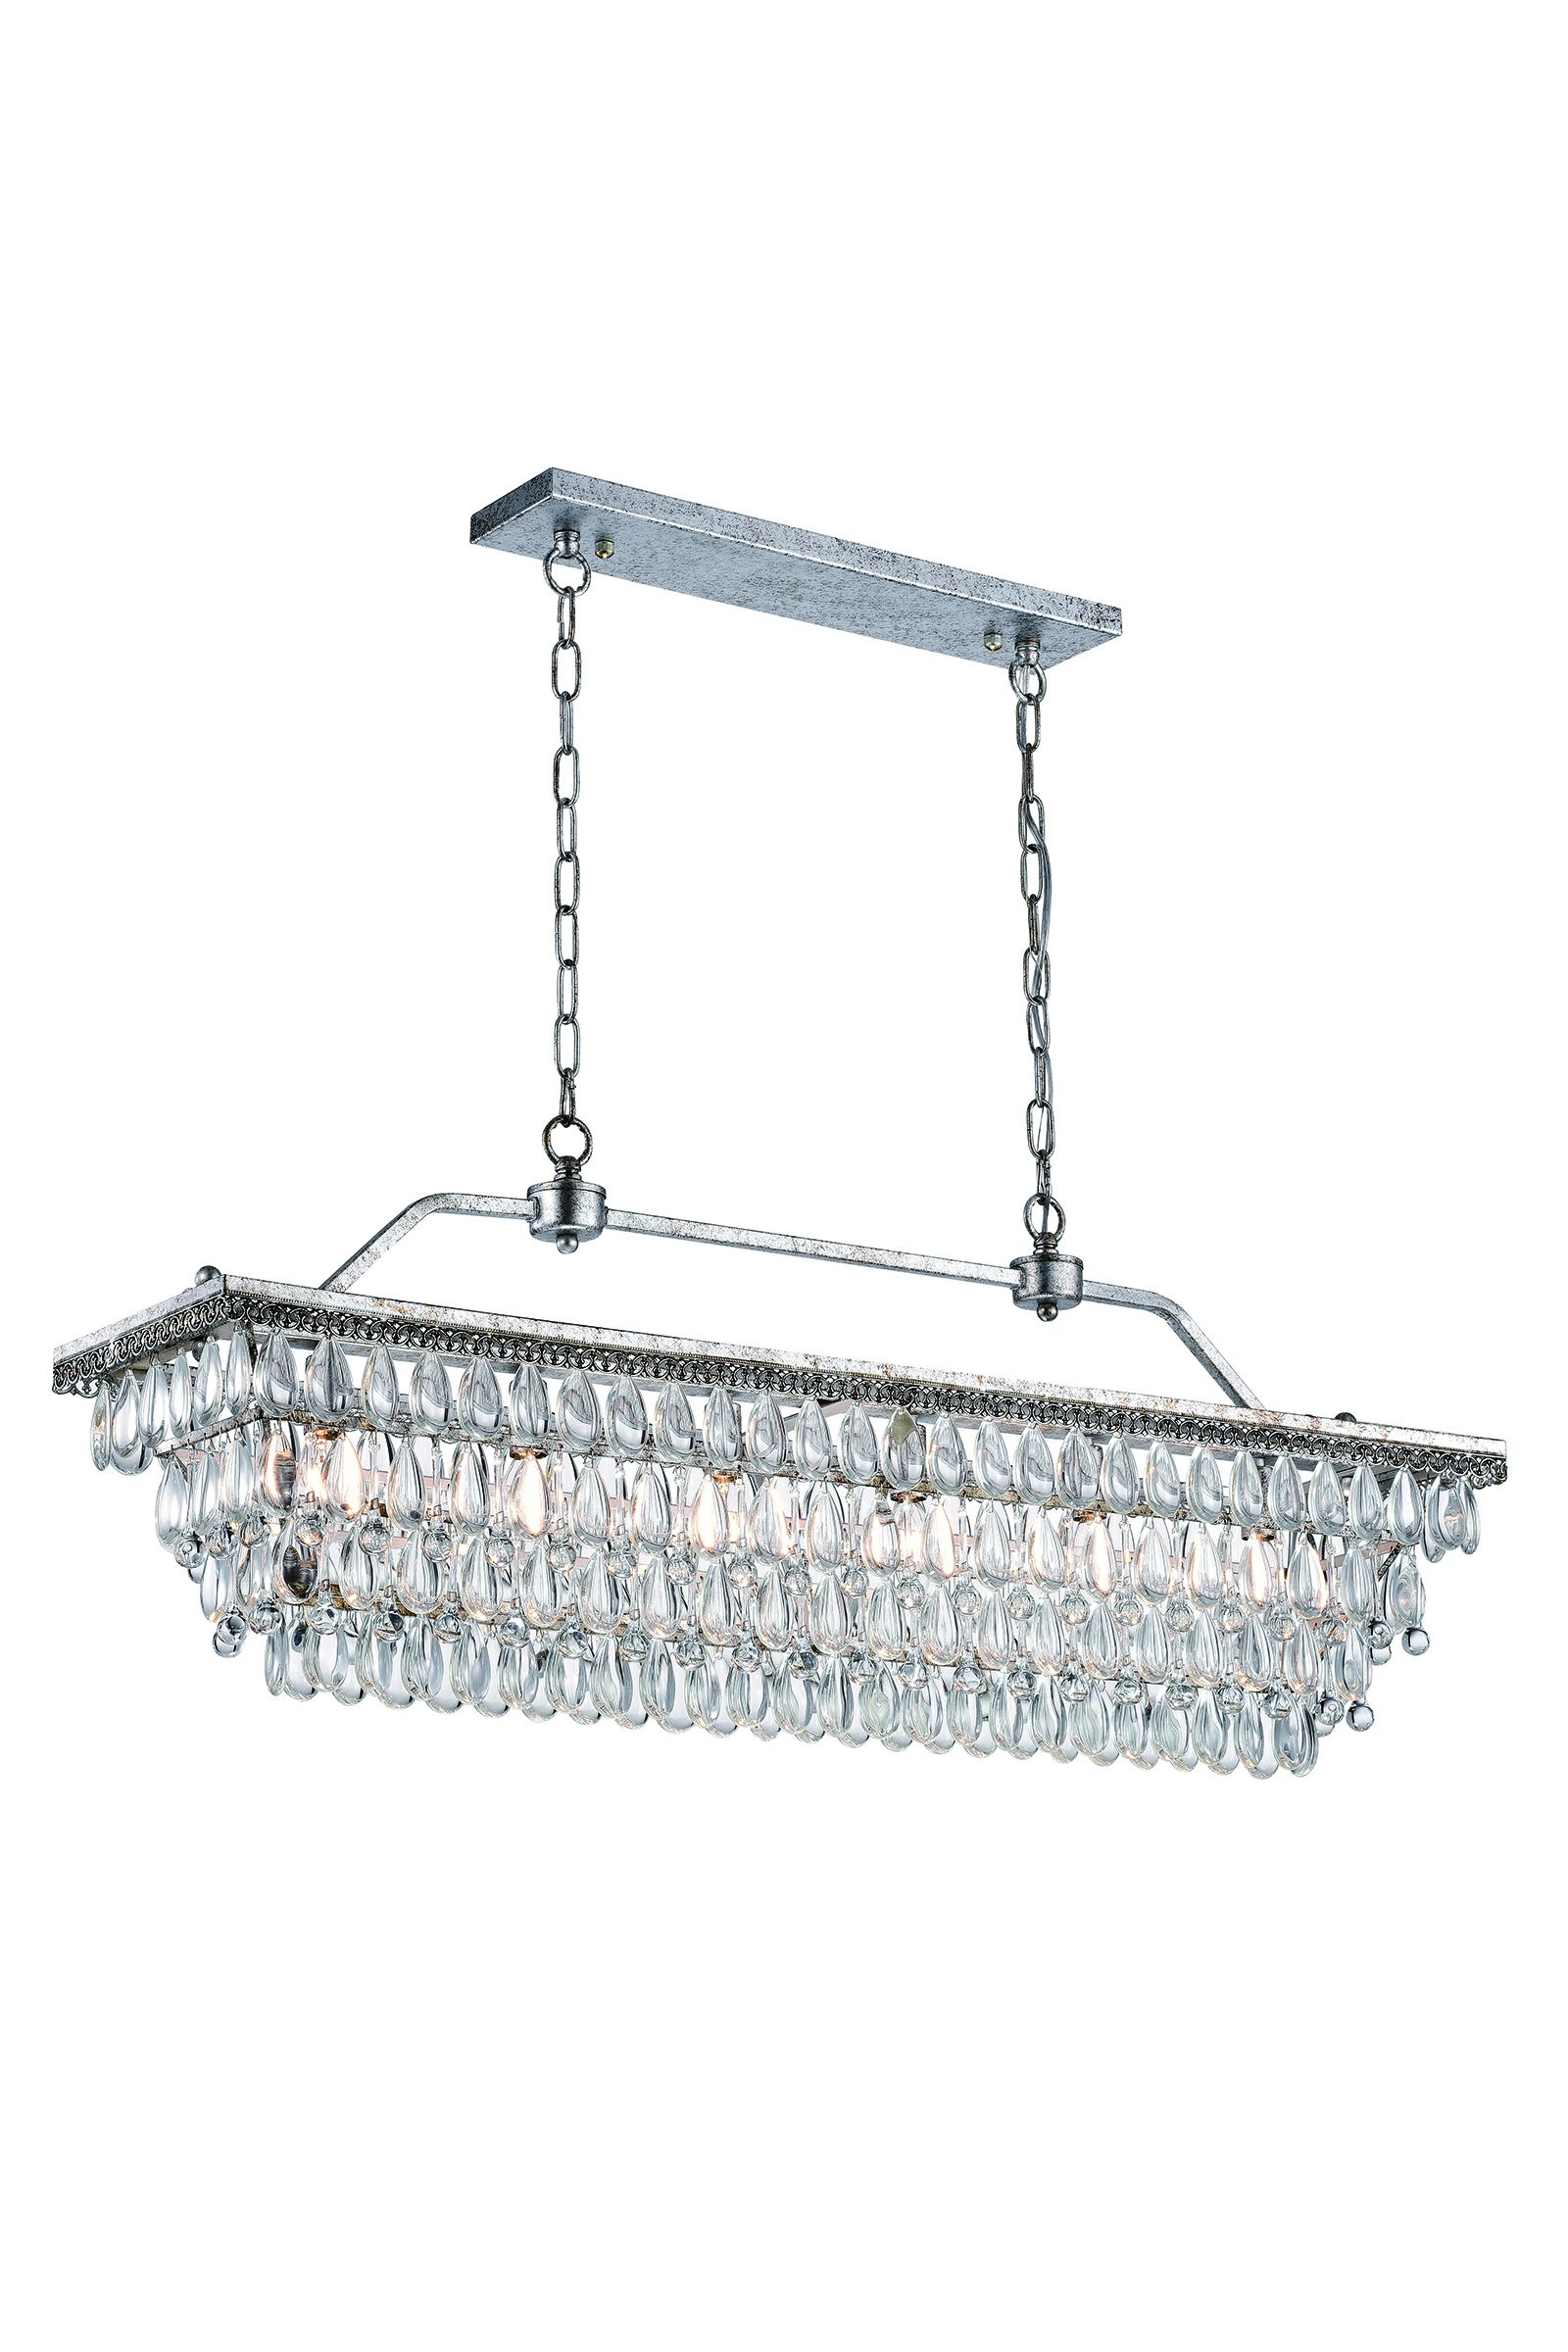 Most Current 6 Light Antique Silver Rectangular Crystal Chandelier Inside Four Light Antique Silver Chandeliers (View 16 of 20)